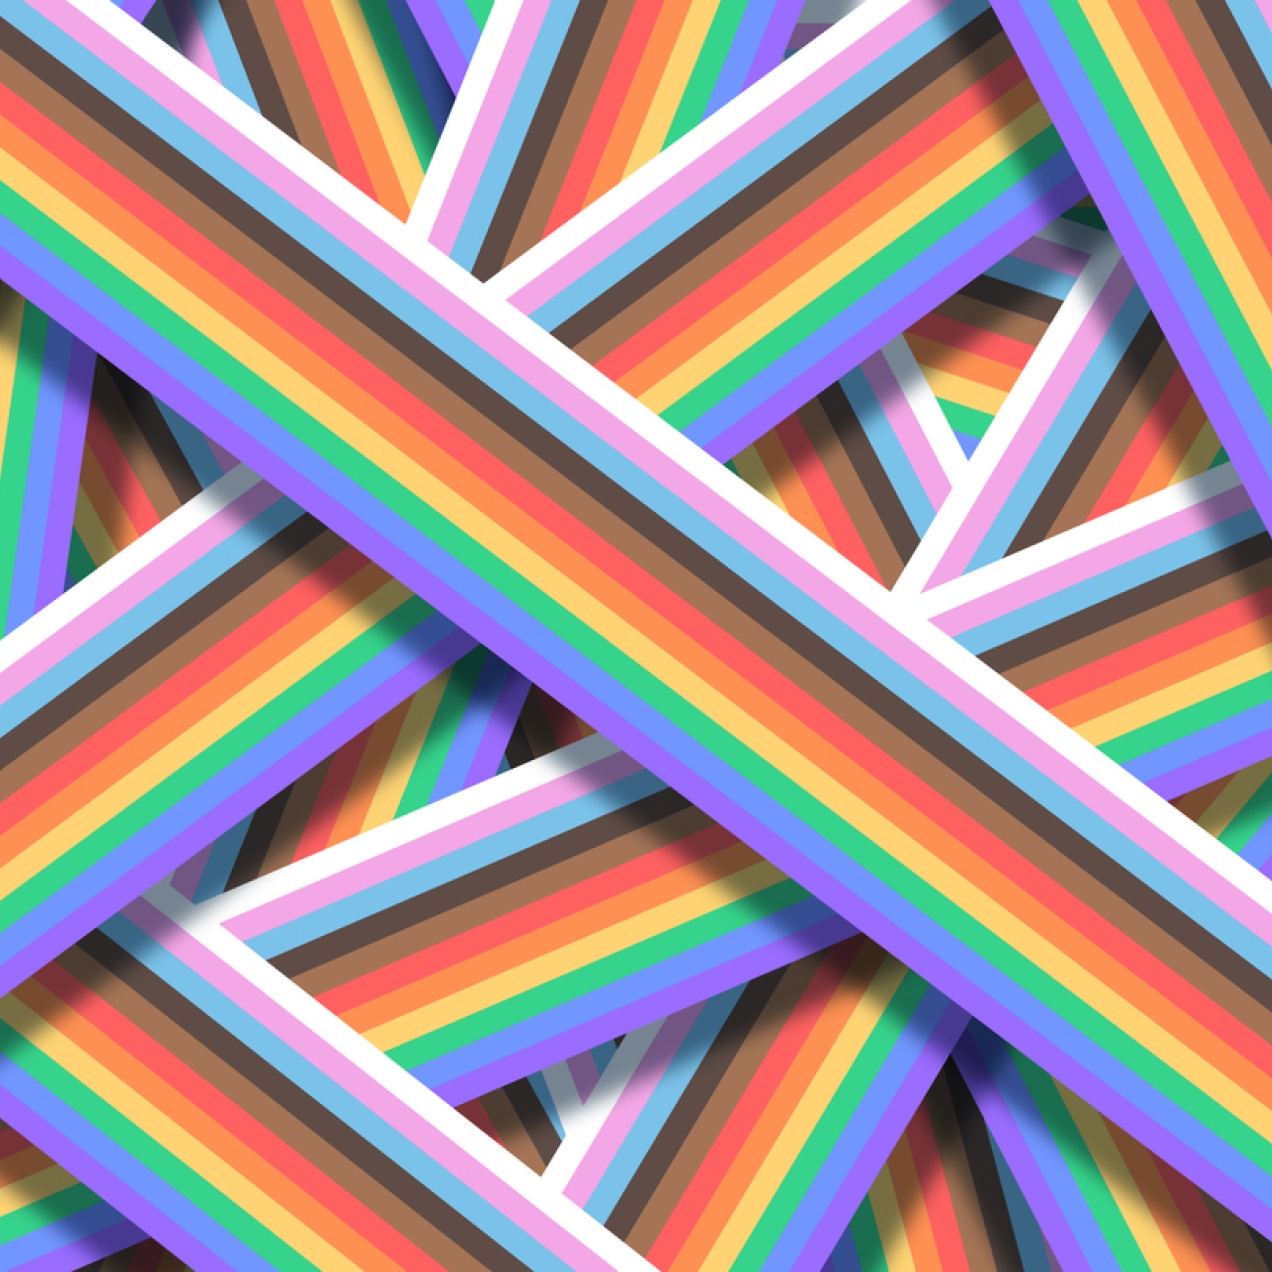 An assortment of overlapping stripes formed of the LGBT+ pride flag colours of white, pink, light blue, black, brown, red, orange, yellow, green, blue and violet